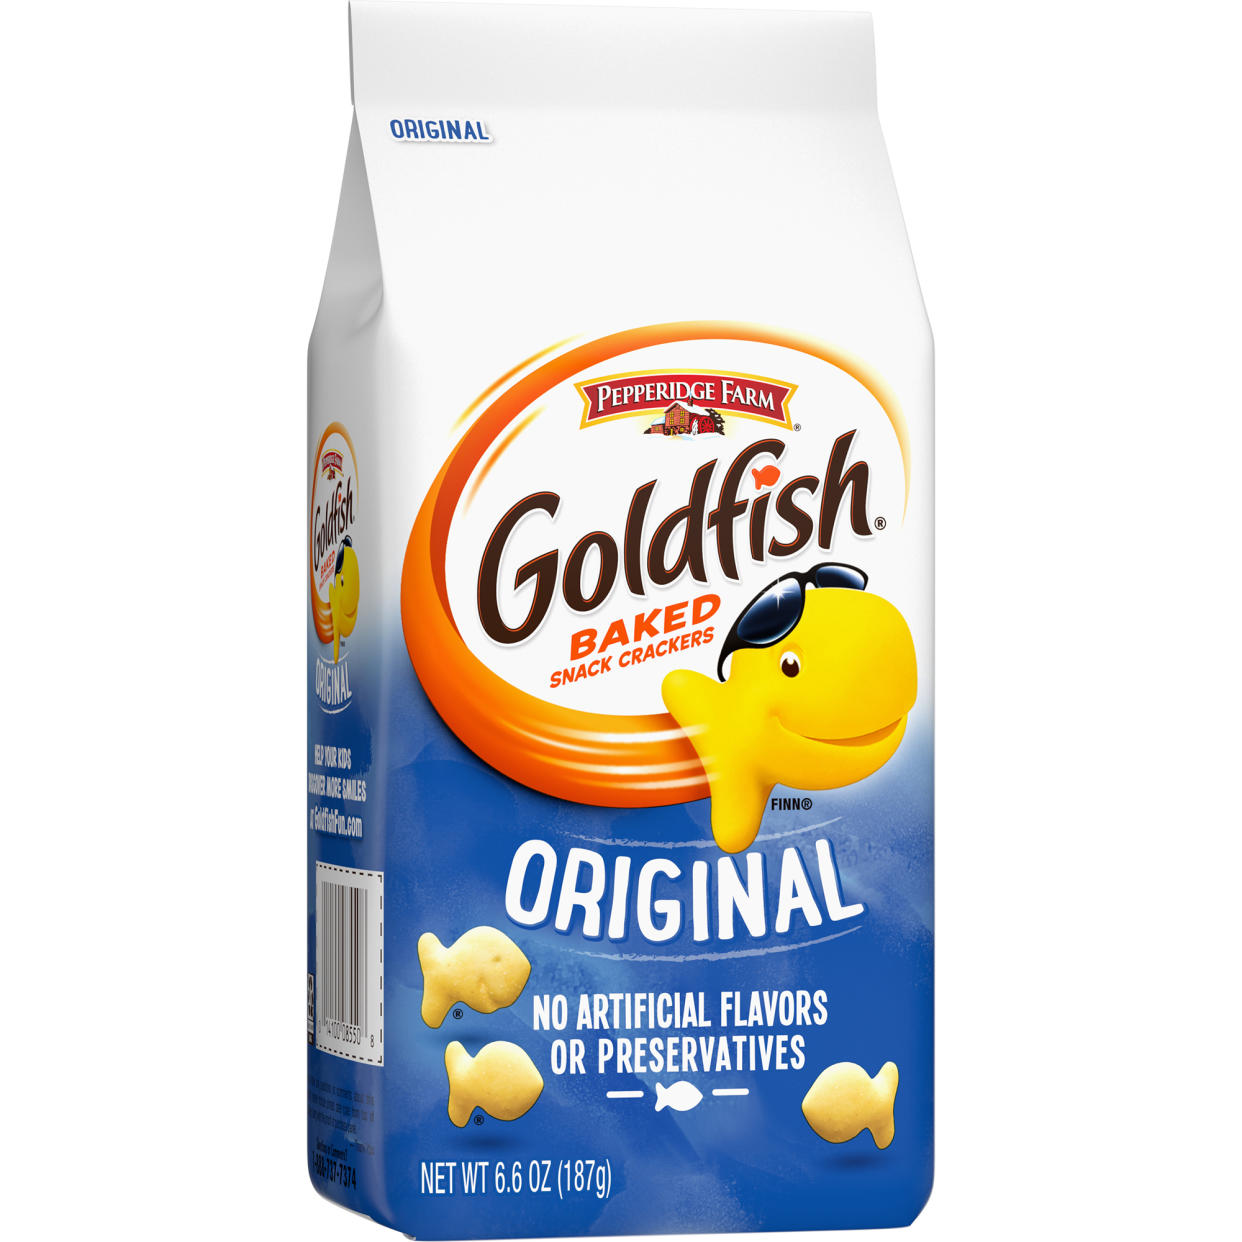 Original flavor Goldfish are lightly salted and mildly flavored. (Campbell's)